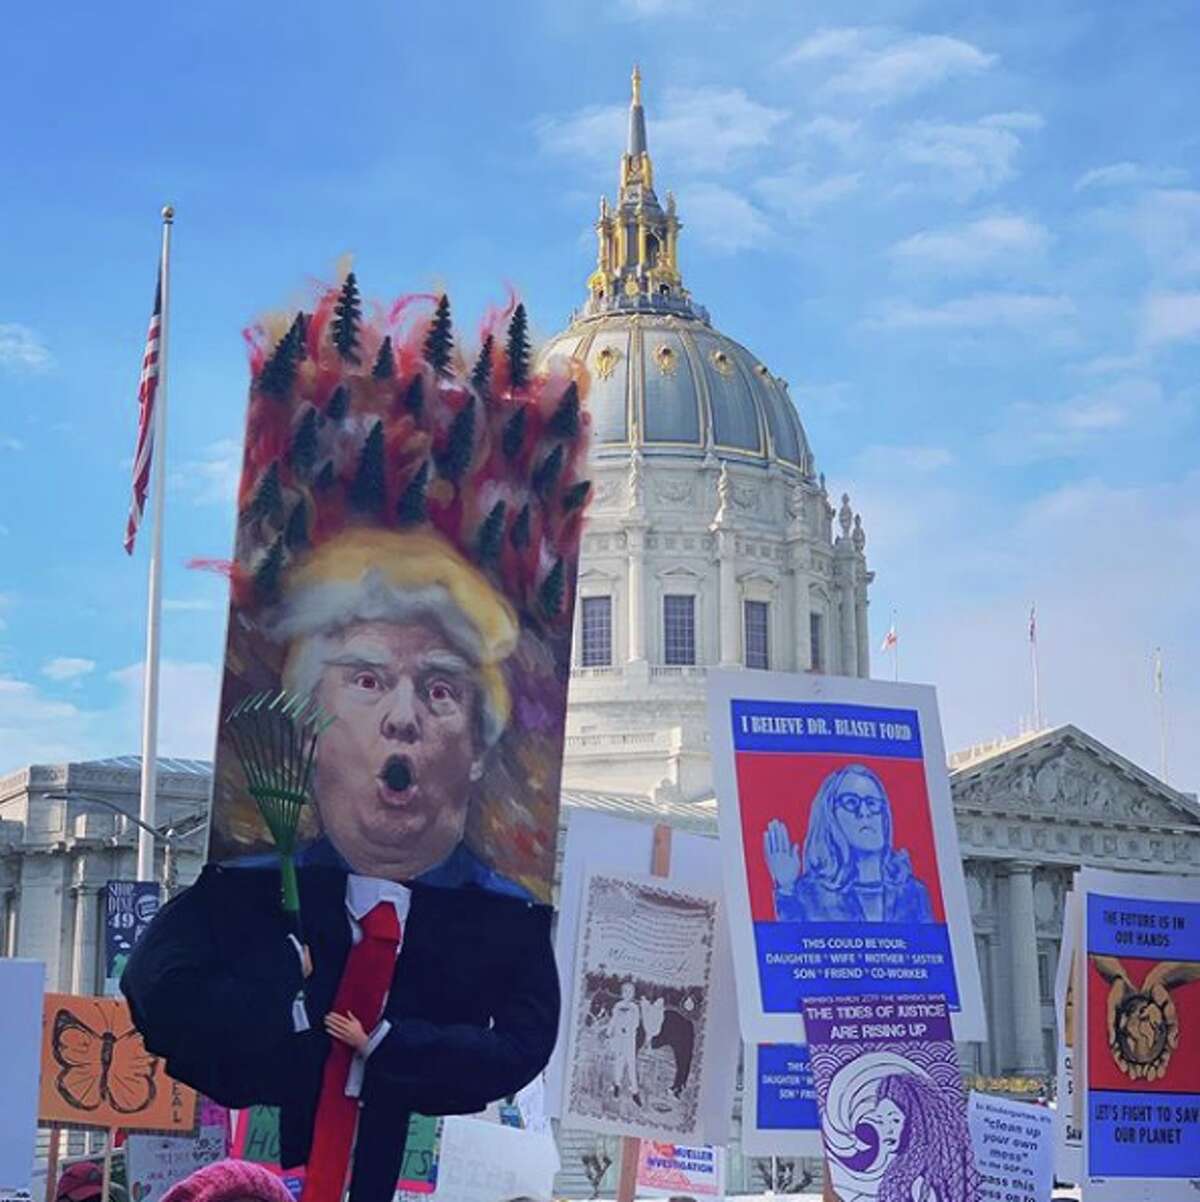 Participants in the Women's March in San Francisco came up with creative signs and art for Saturday.